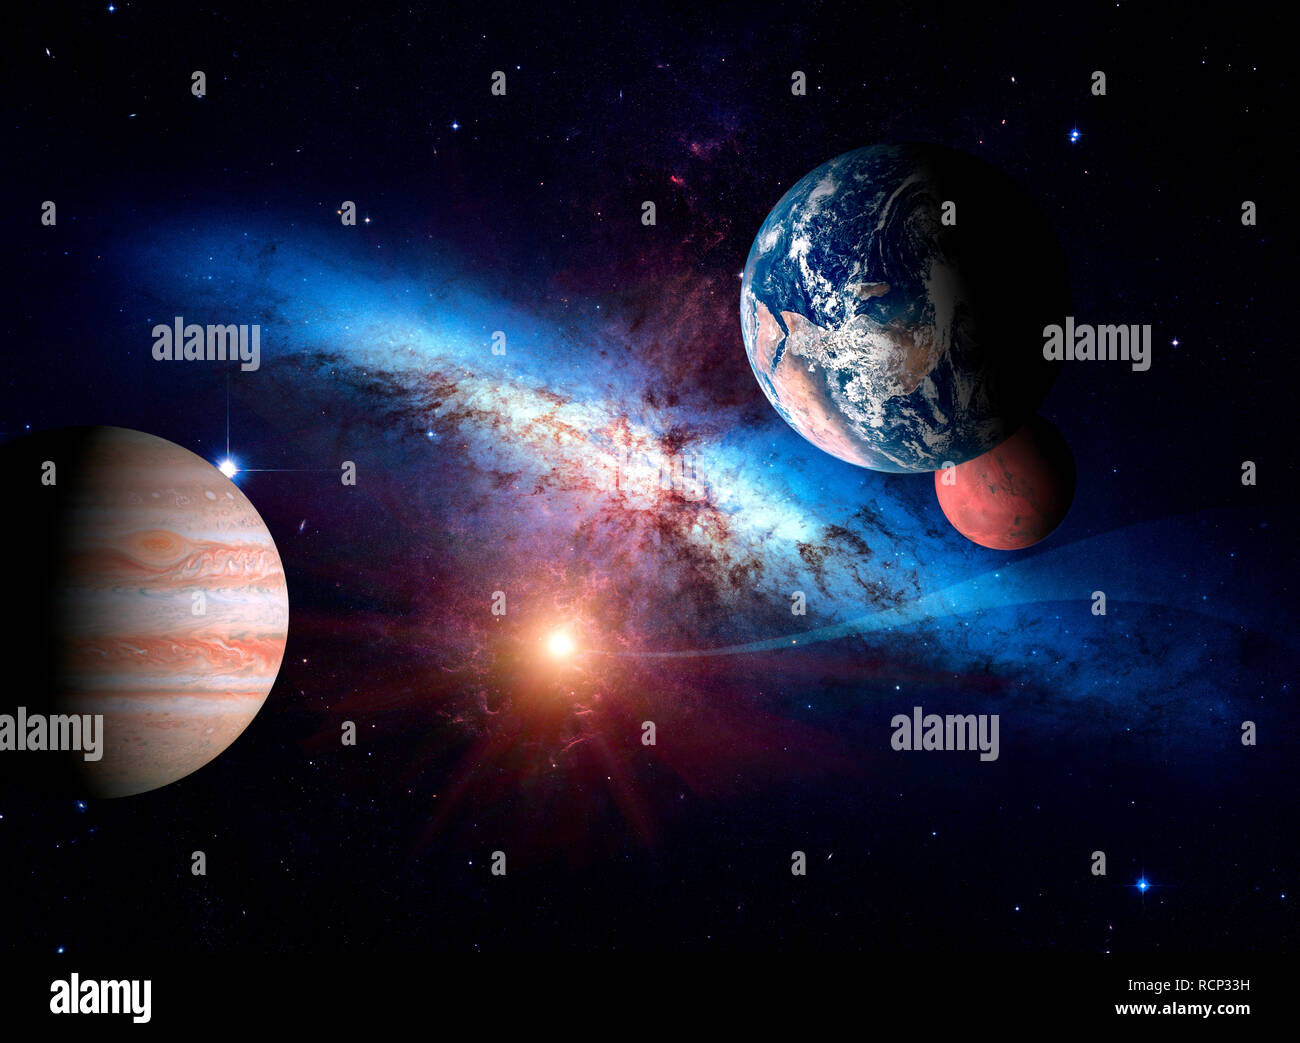 Planets Of The Solar System Against The Background Of A